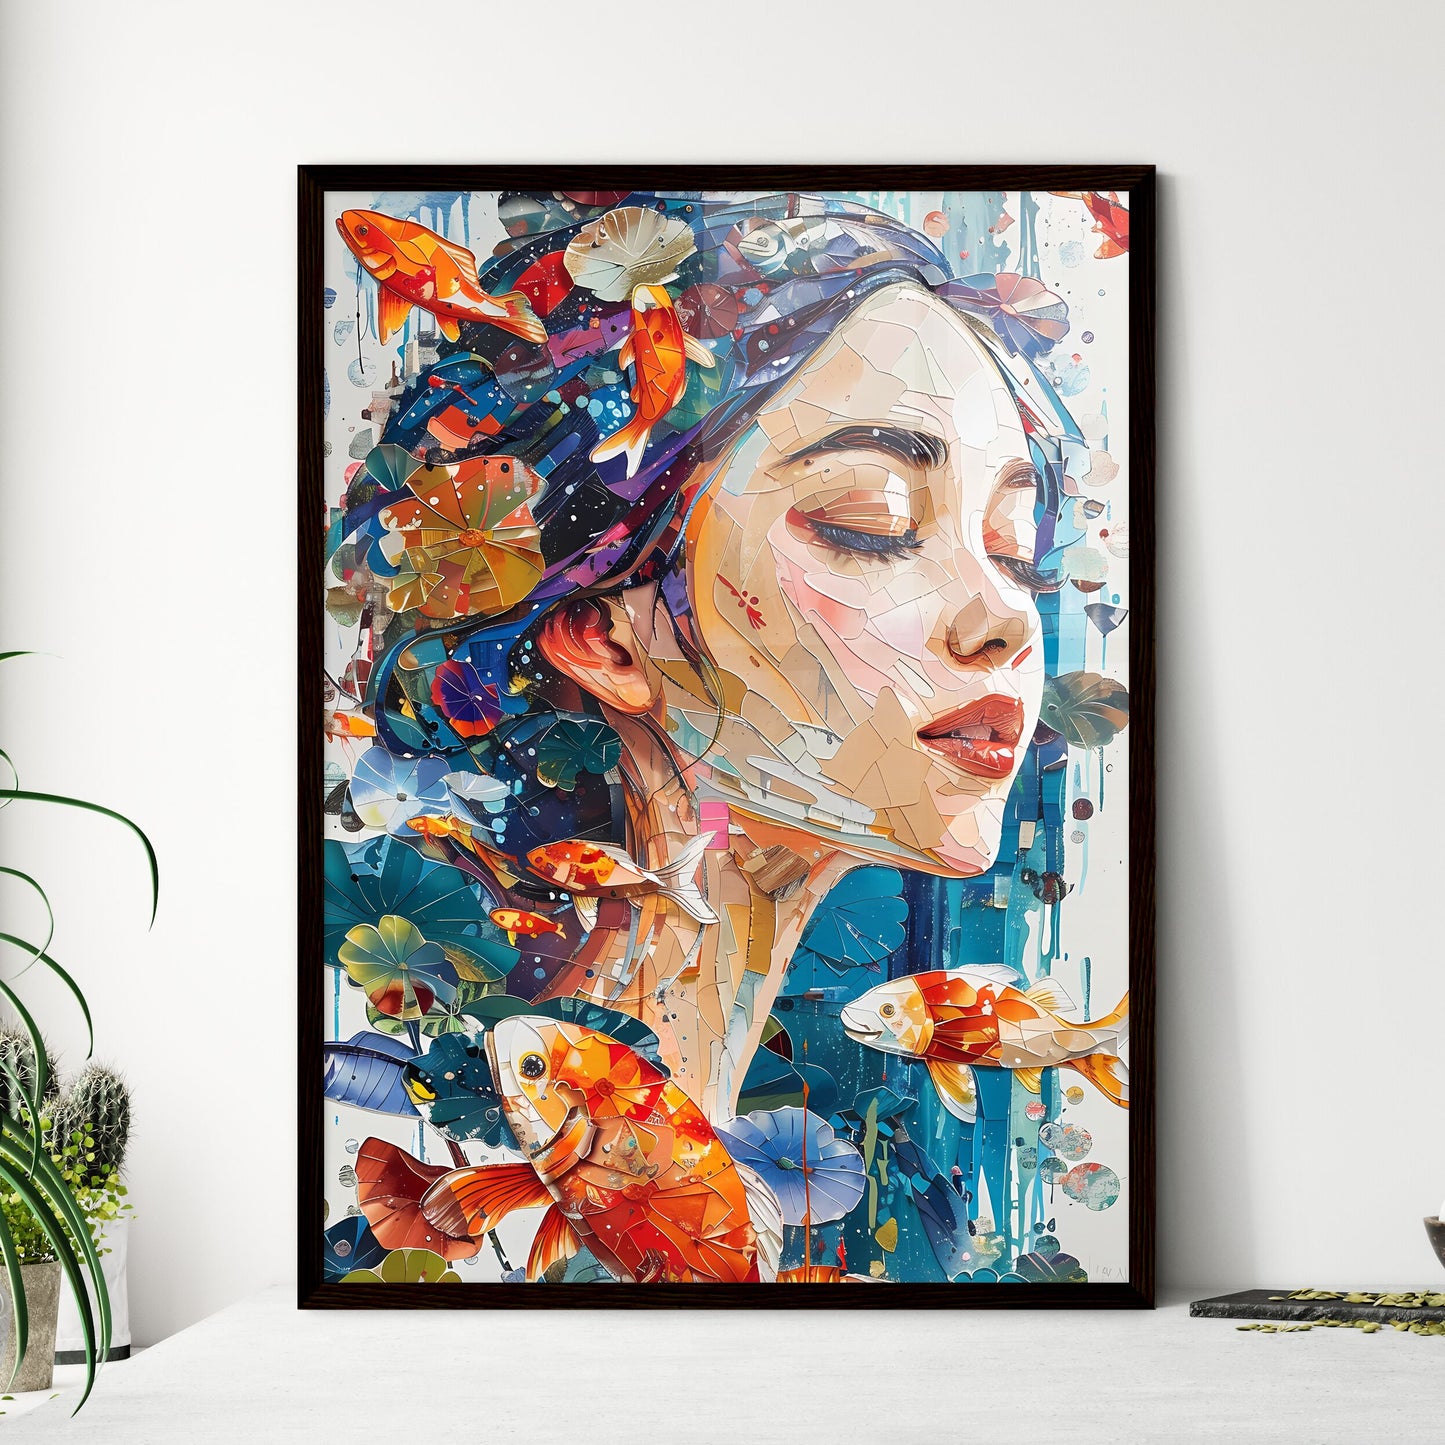 Colorful Pop Art Venus Mosaic: Vibrant Screen Printed Painting with Spray Paint and Fish Default Title